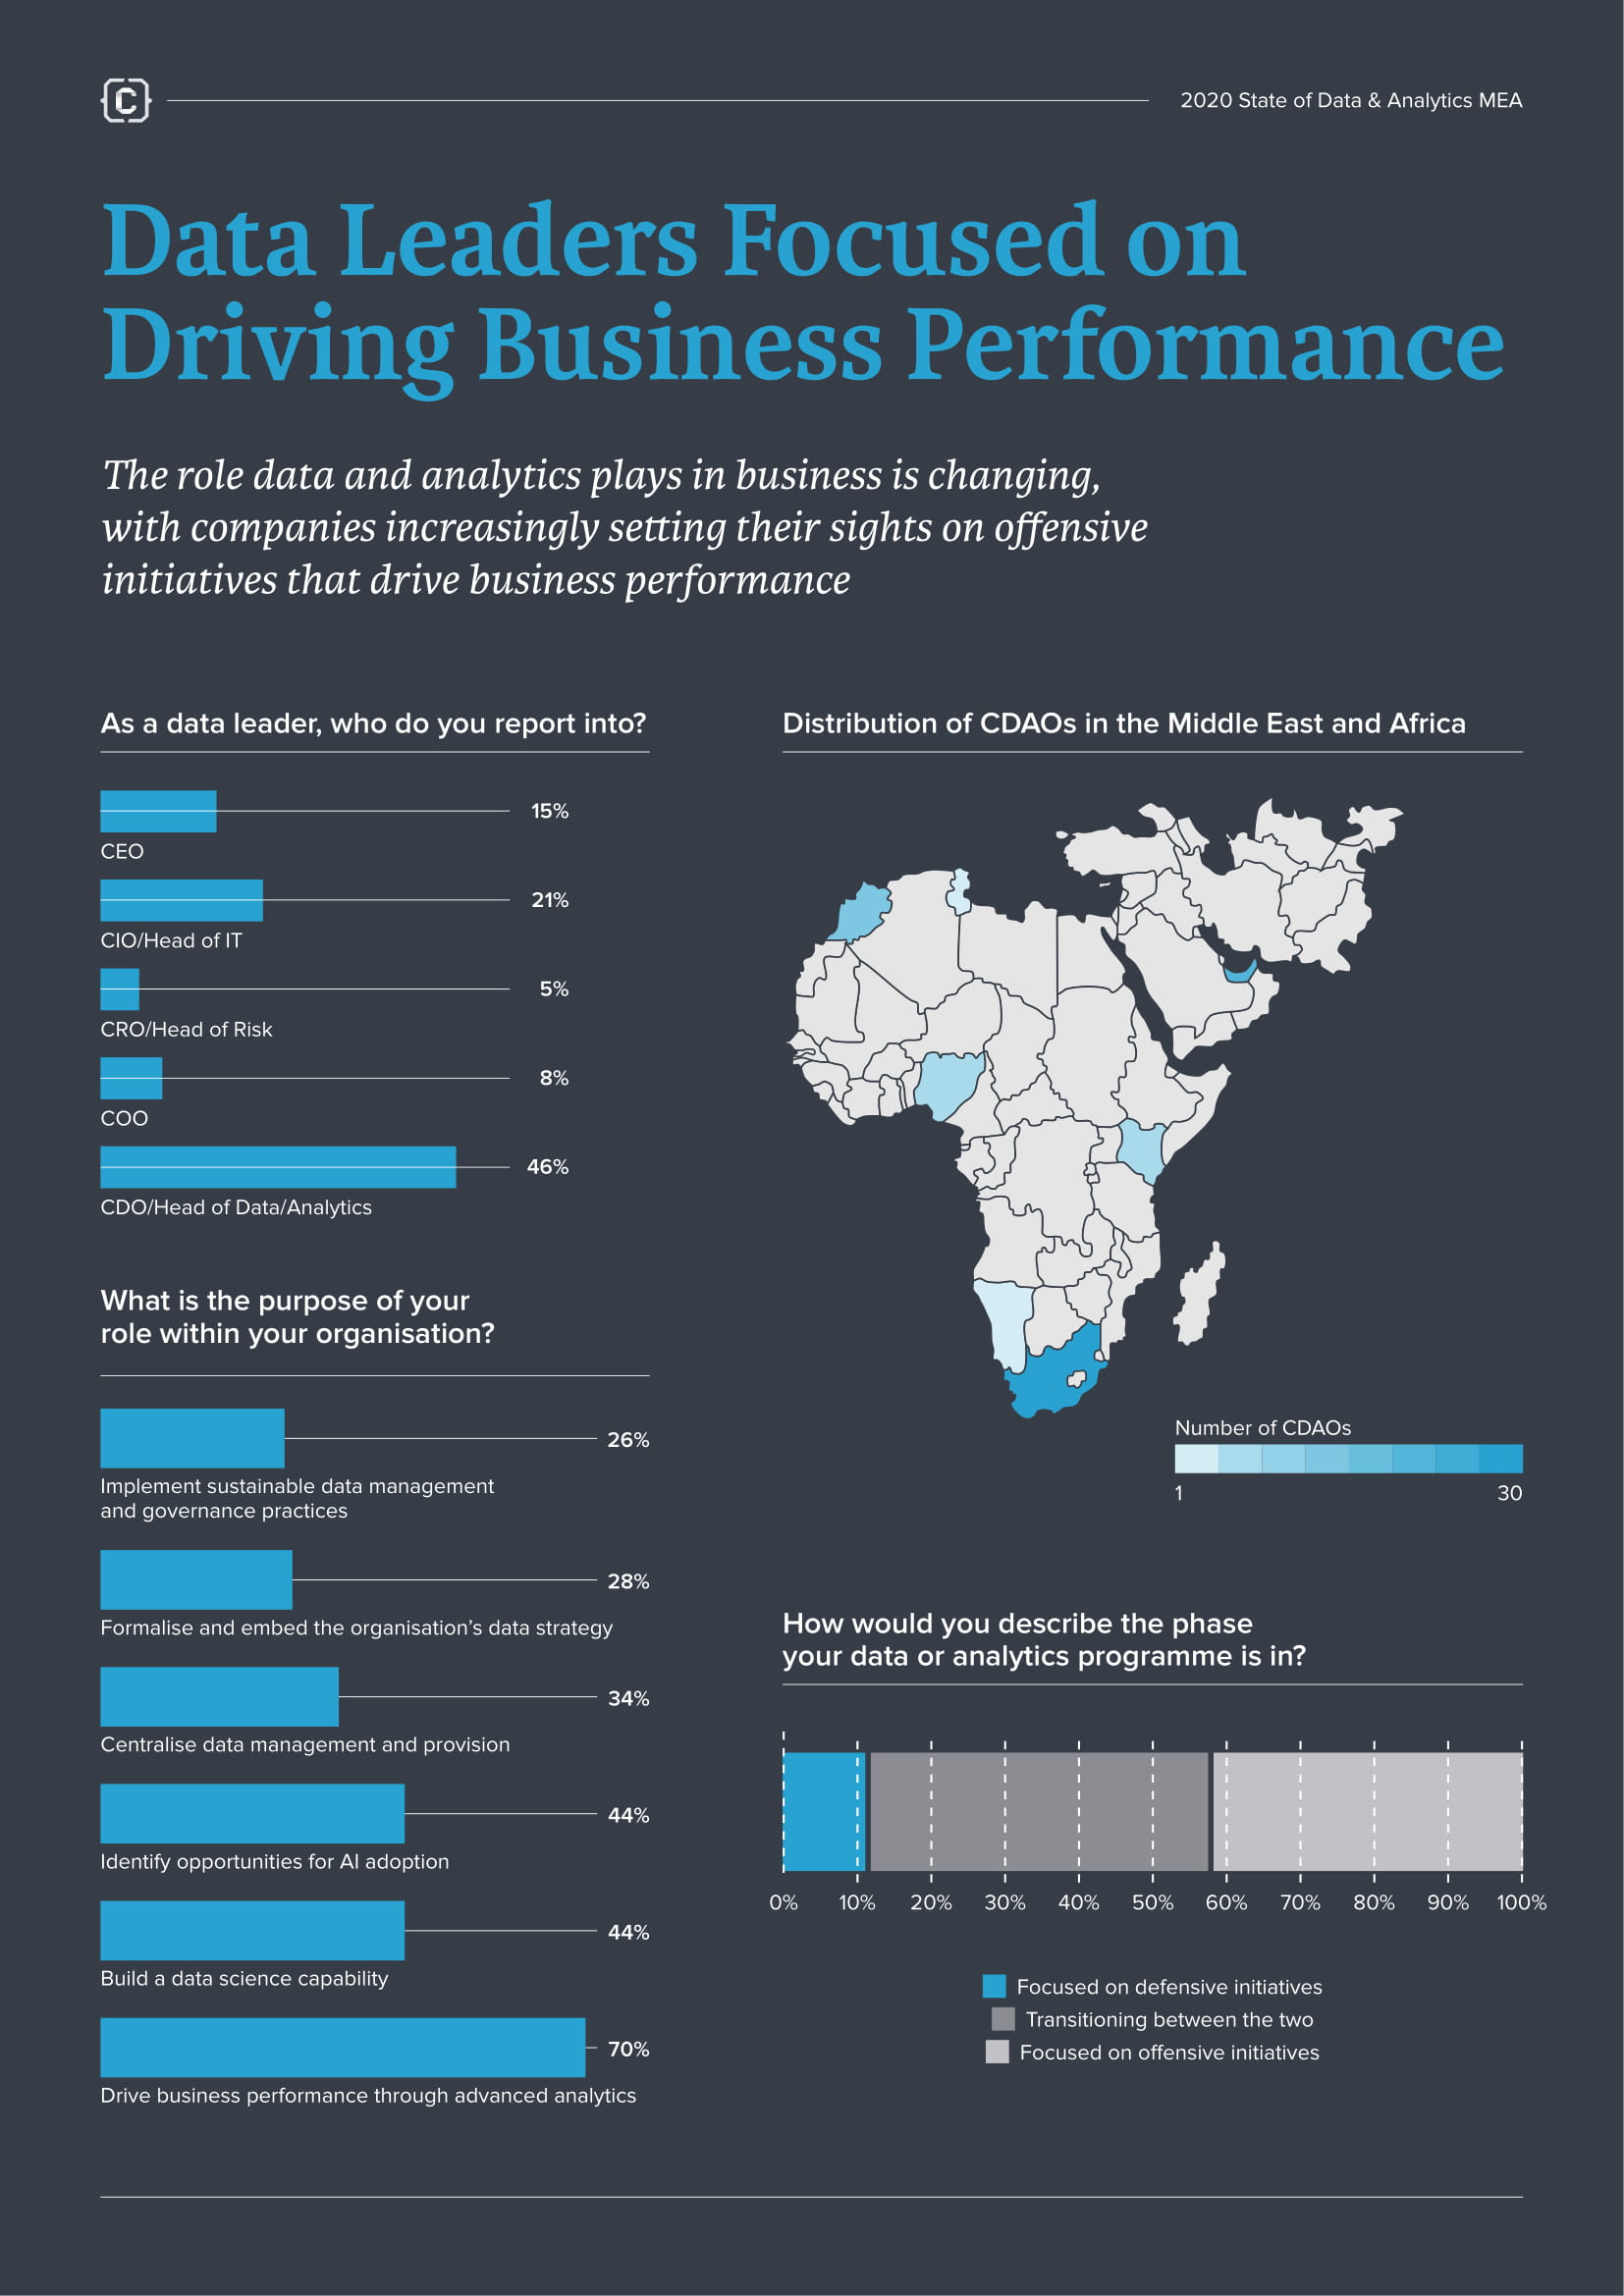 Data Leaders Focused on Driving Business Performance